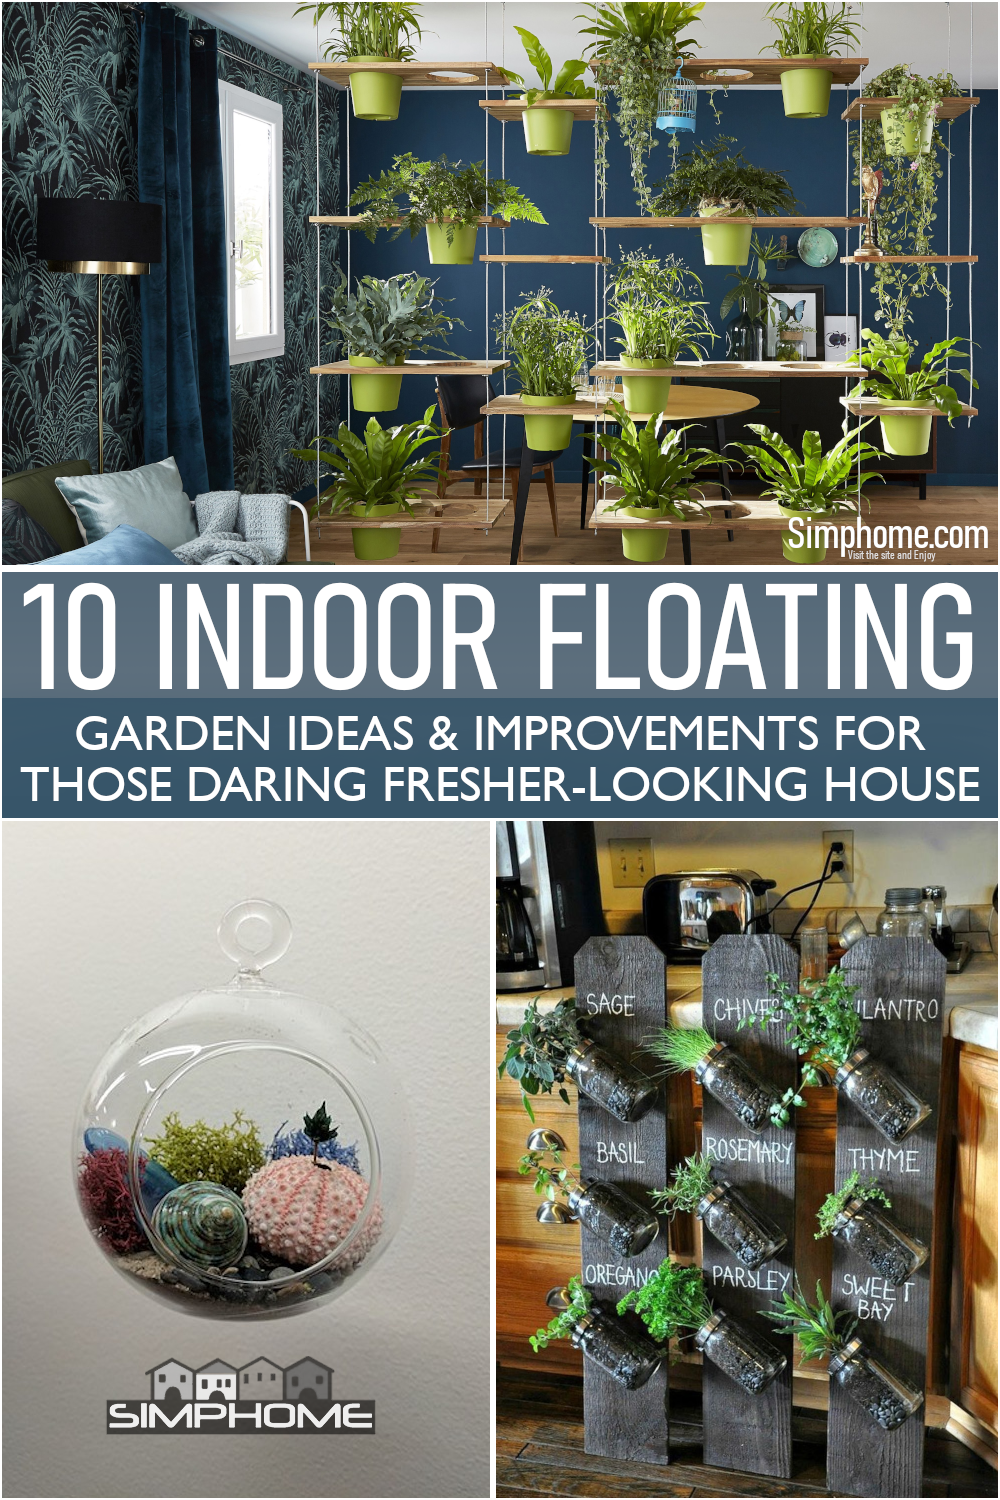 This is awesome 10 Indoor Floating Garden images